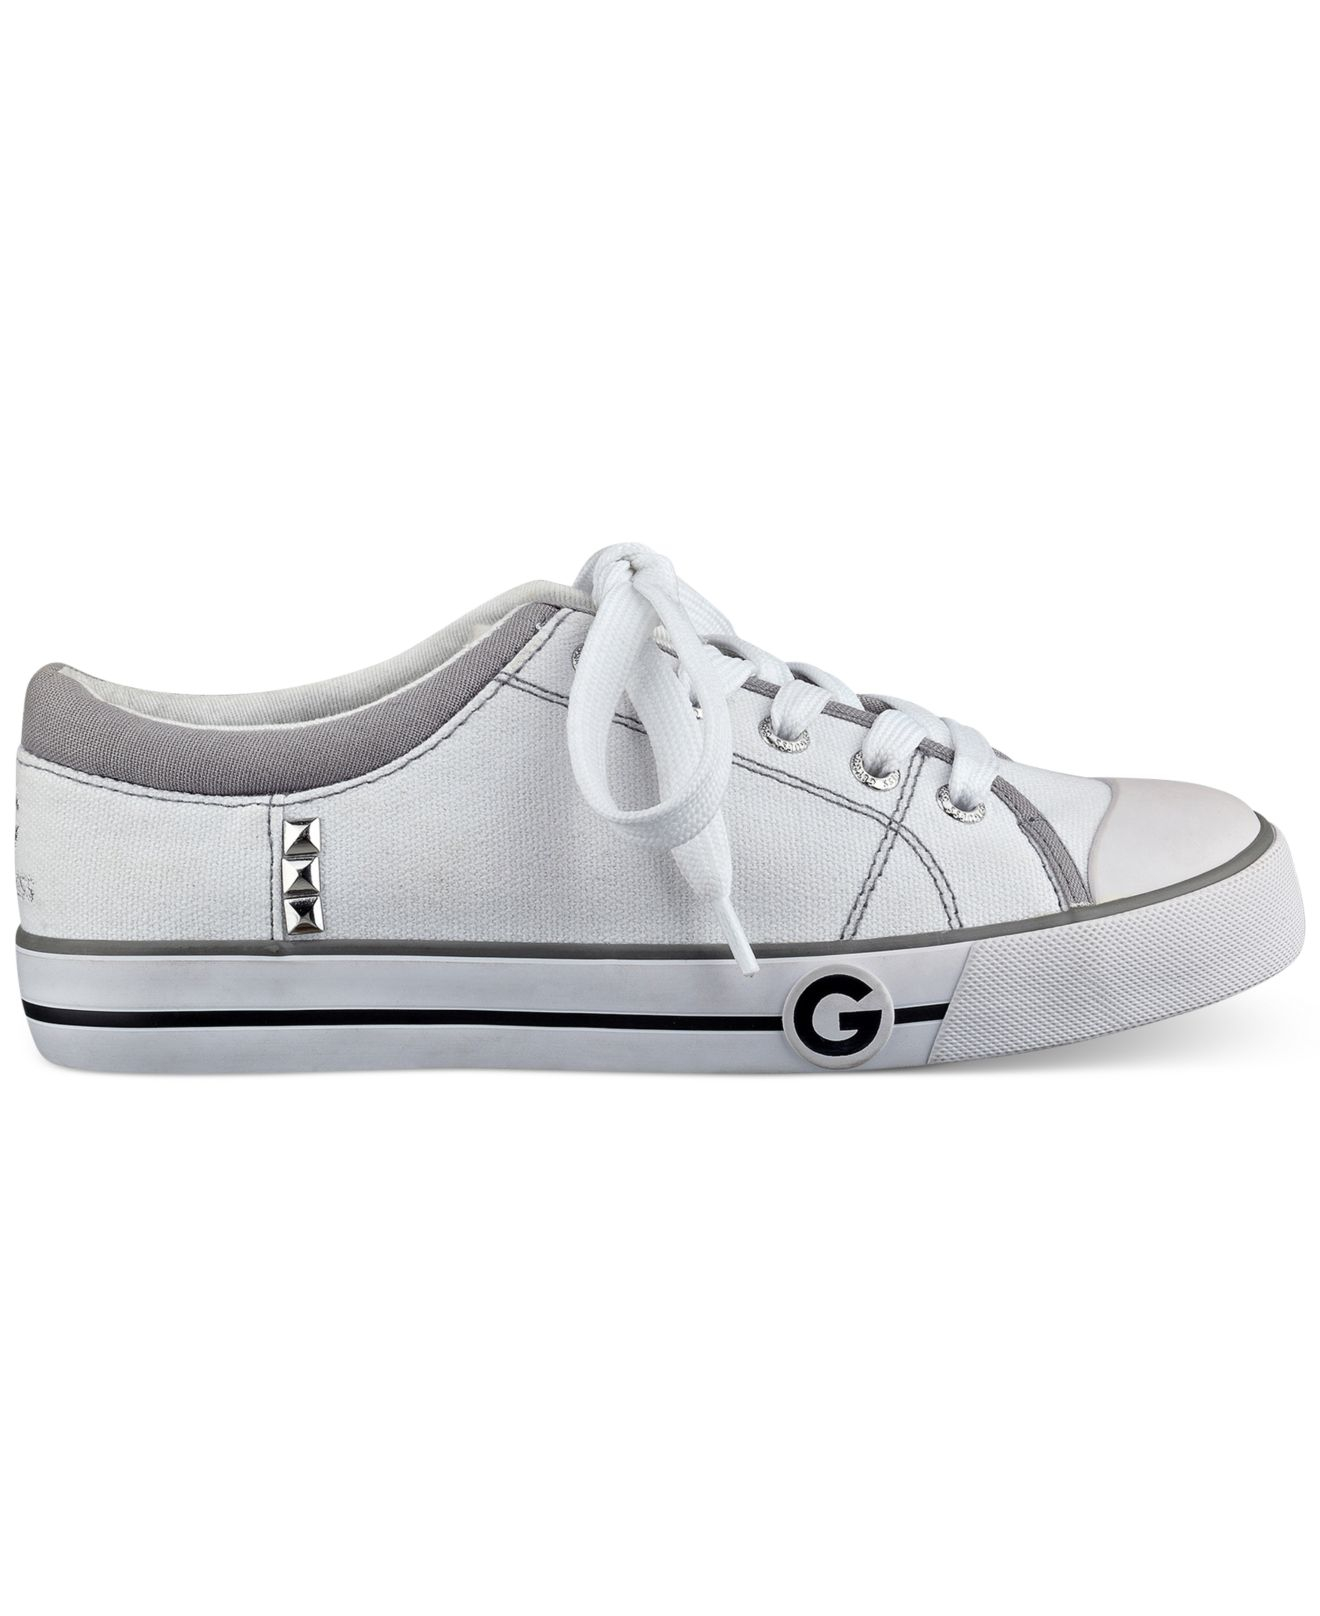 G by guess Oona Sneakers in White - Save 19% | Lyst